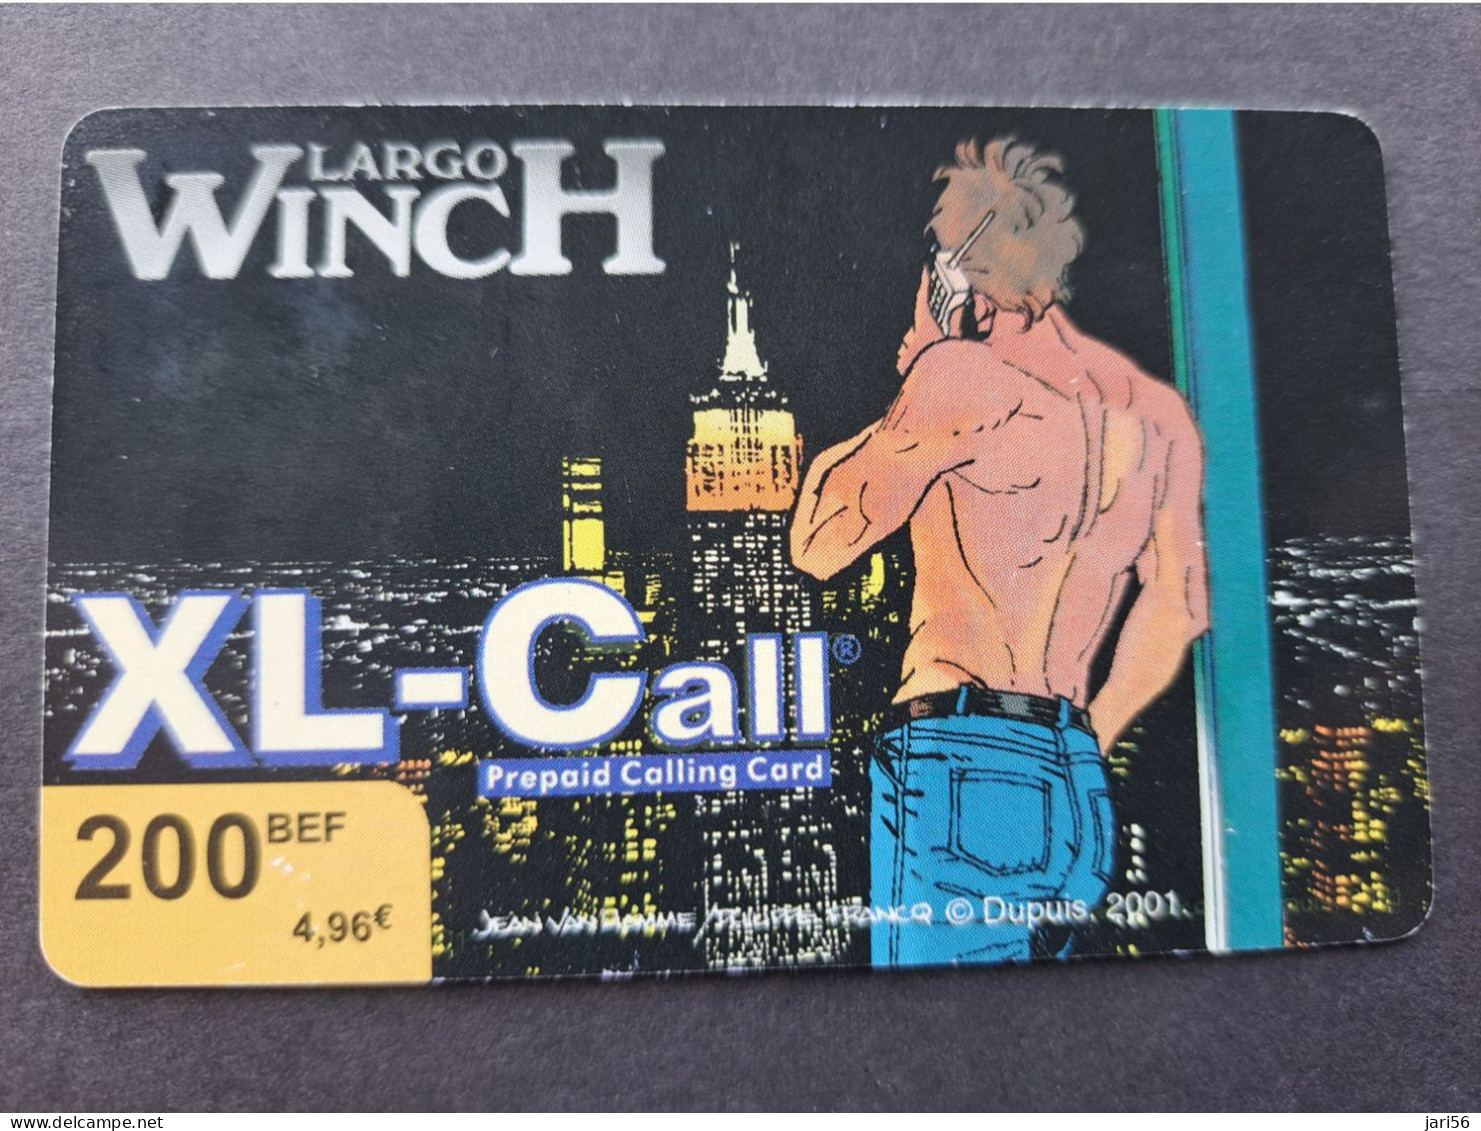 BELGIUM / XL-CALL € 4,96  /  LARGO- WINCH PREPAID /CITY BY NIGHT/    USED  CARD  ** 16617 ** - Without Chip